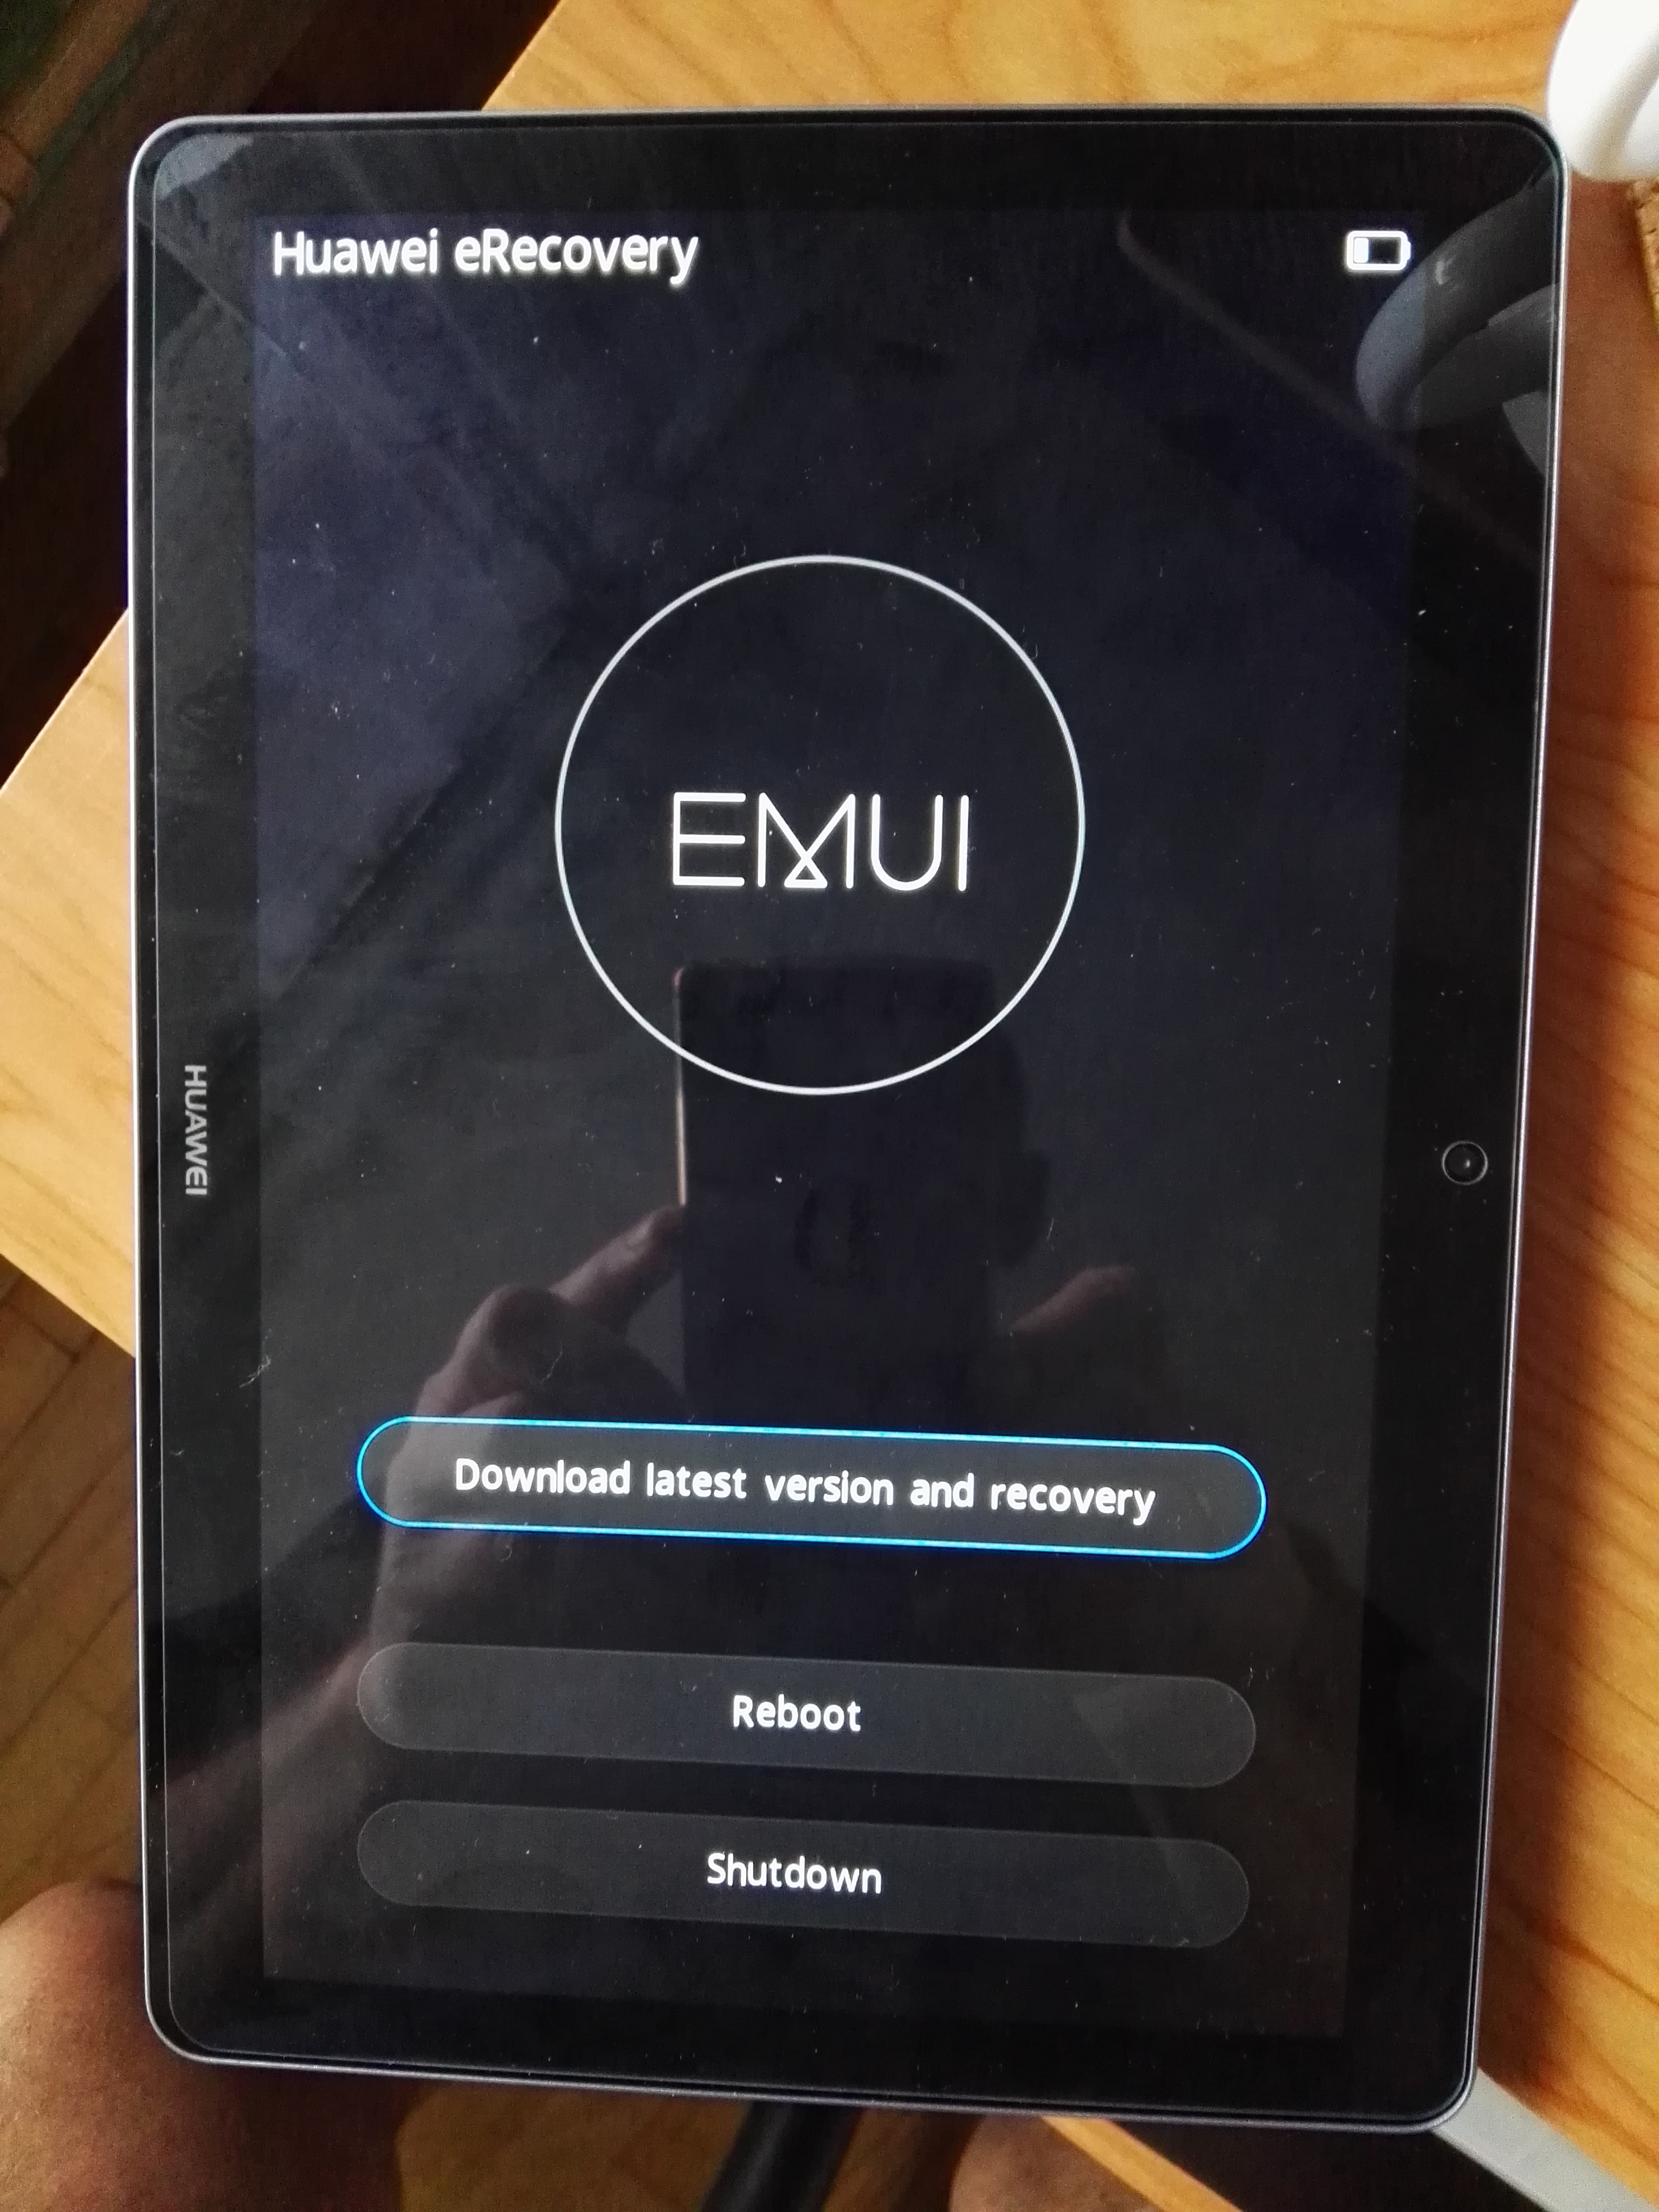 [Solved] Huawei MediaPad T3 10 - Root, AGS-W09, Android 7.0 to 8.0 Upgrade, Emui 5.1, Custom